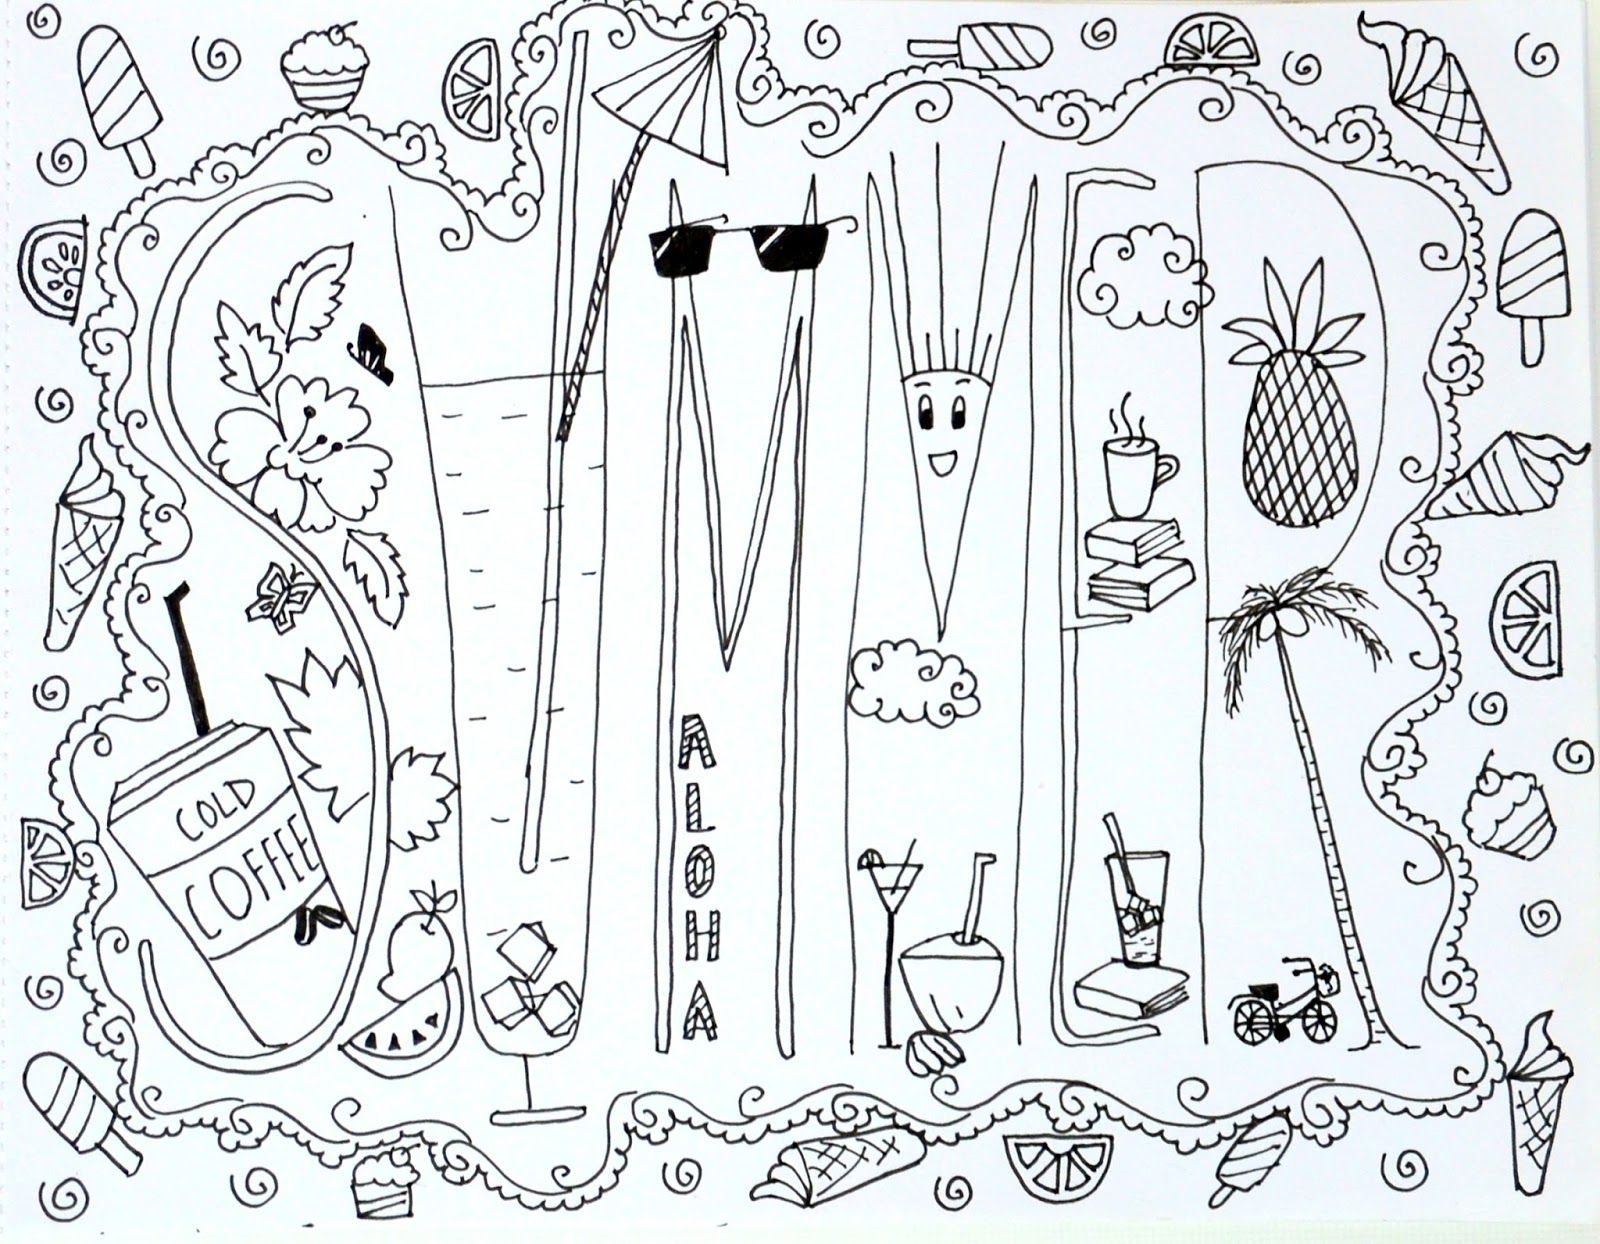 Suchi's CardStock: Summer CLB- Free Coloring Page for you all!! :)